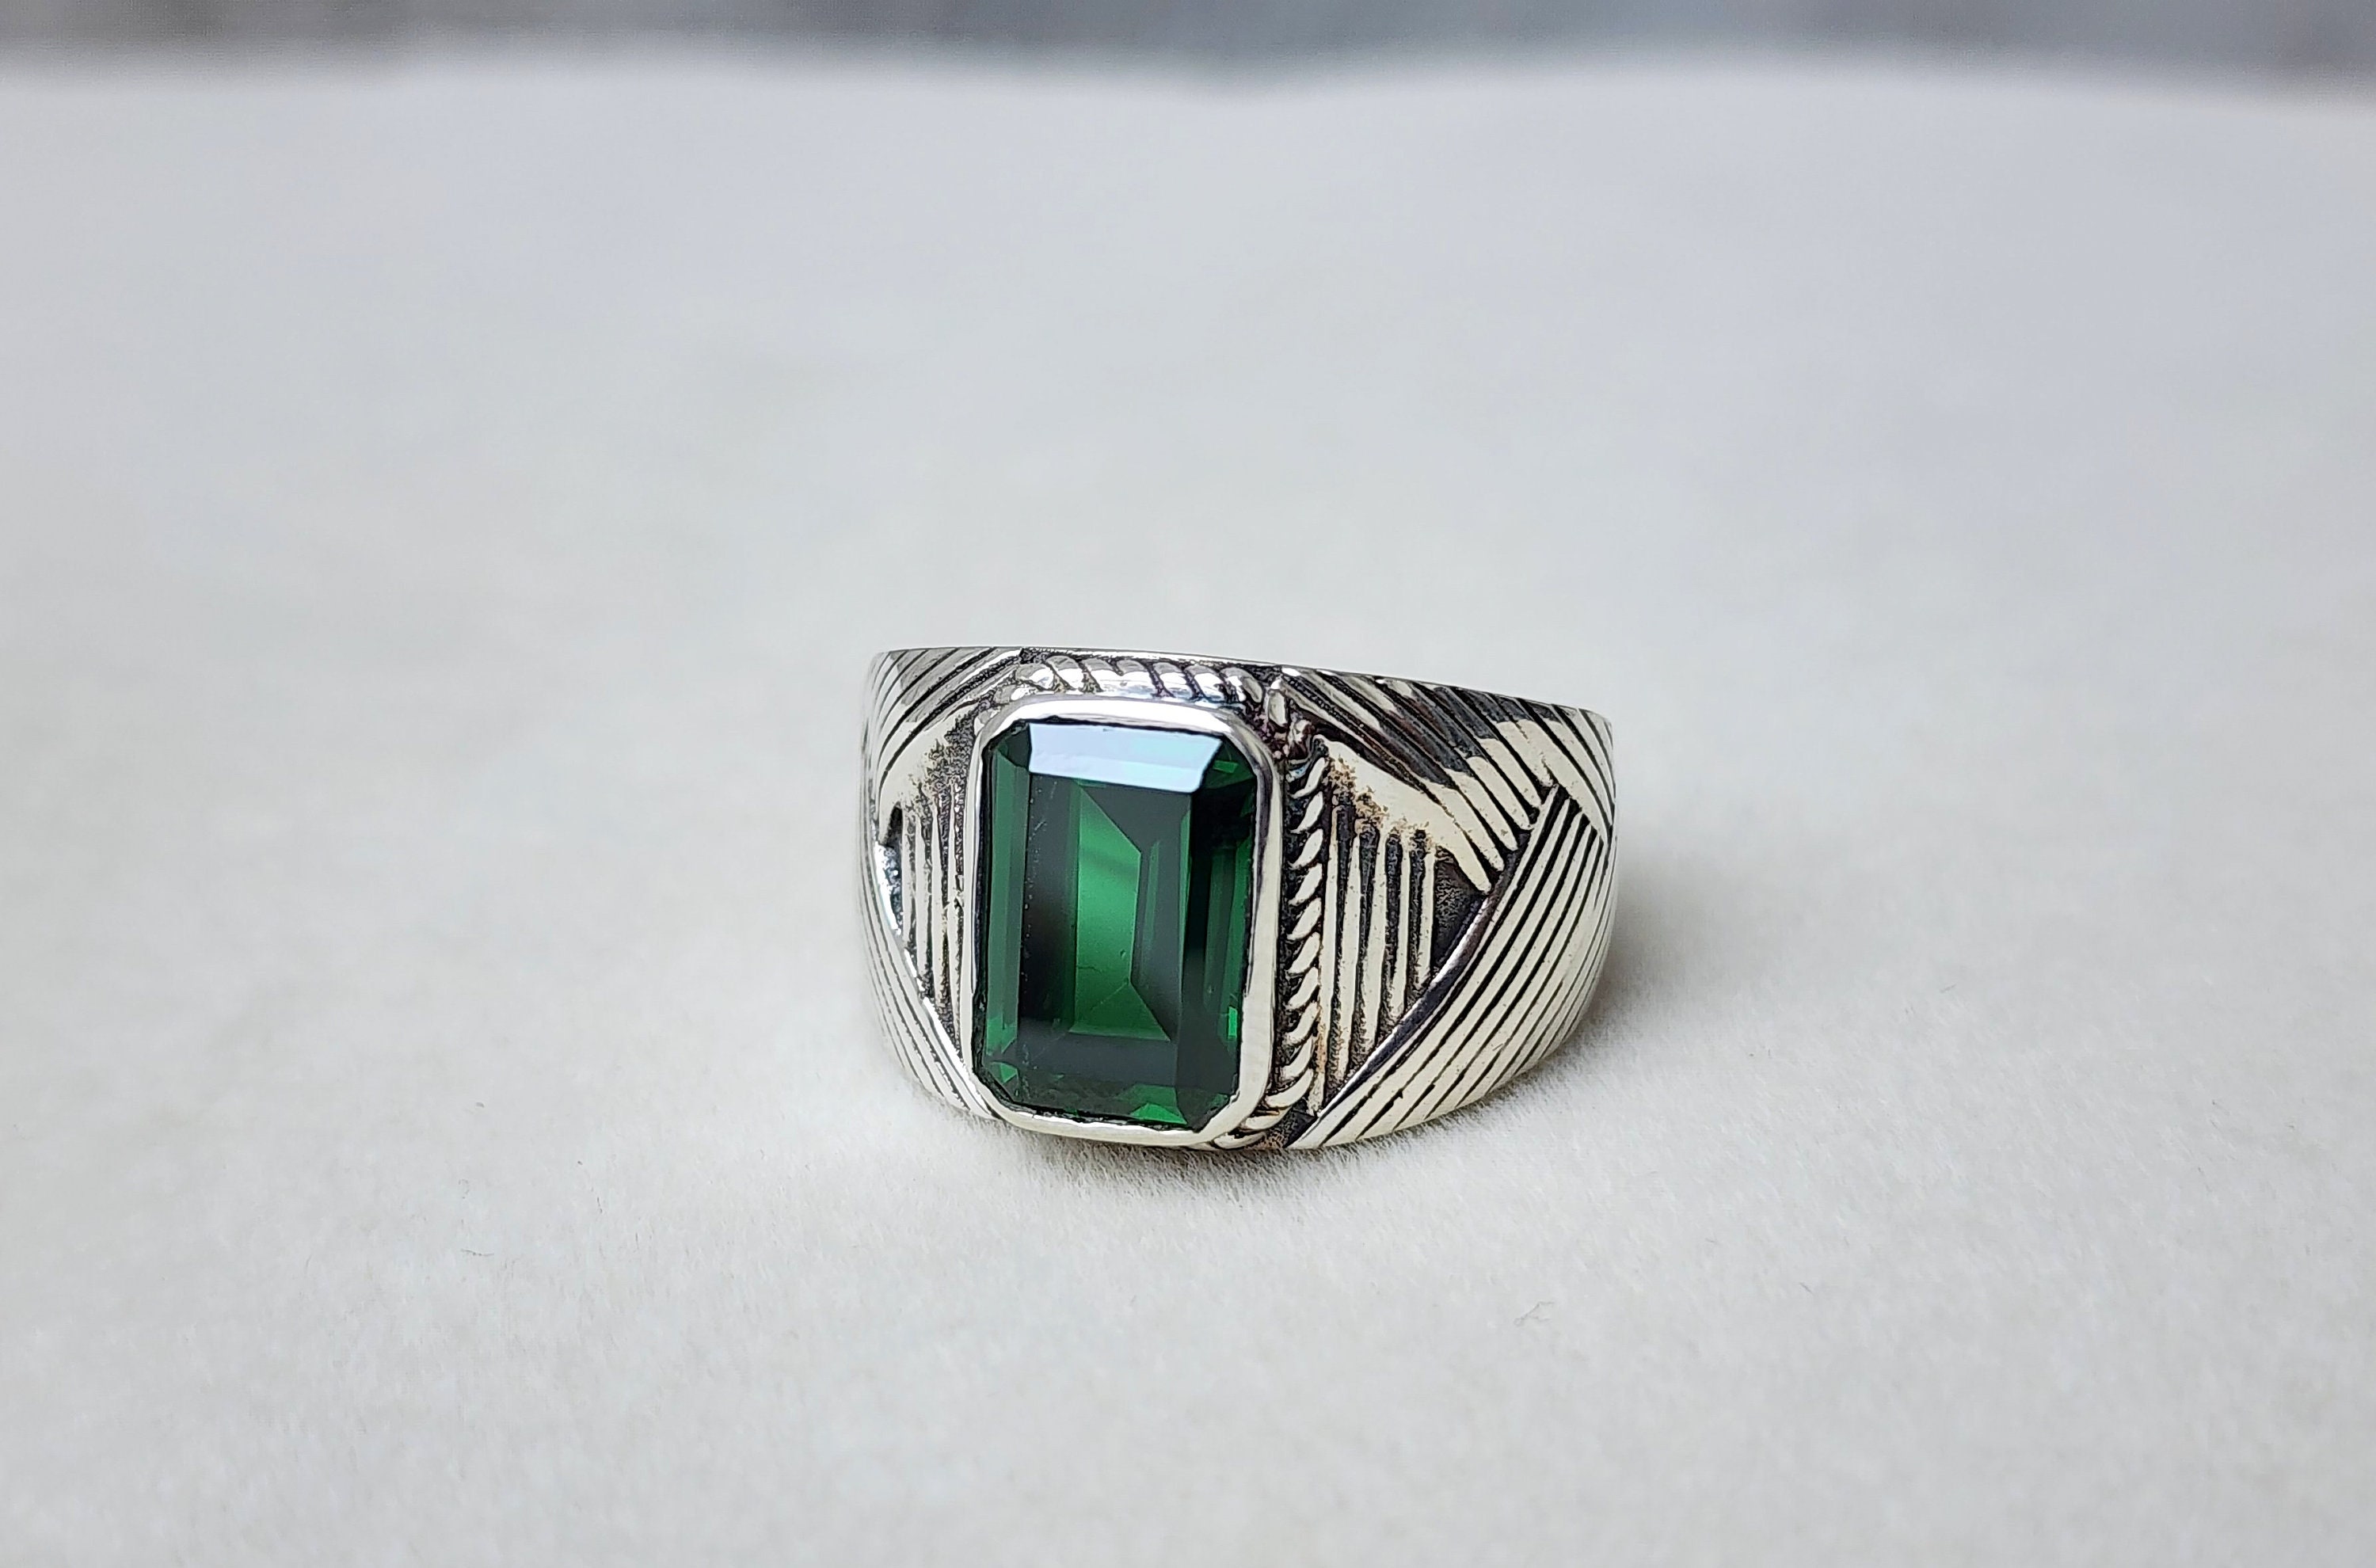 35.0 Ct Silver Ring ~With AAA Clarity Swat Emerald Stone